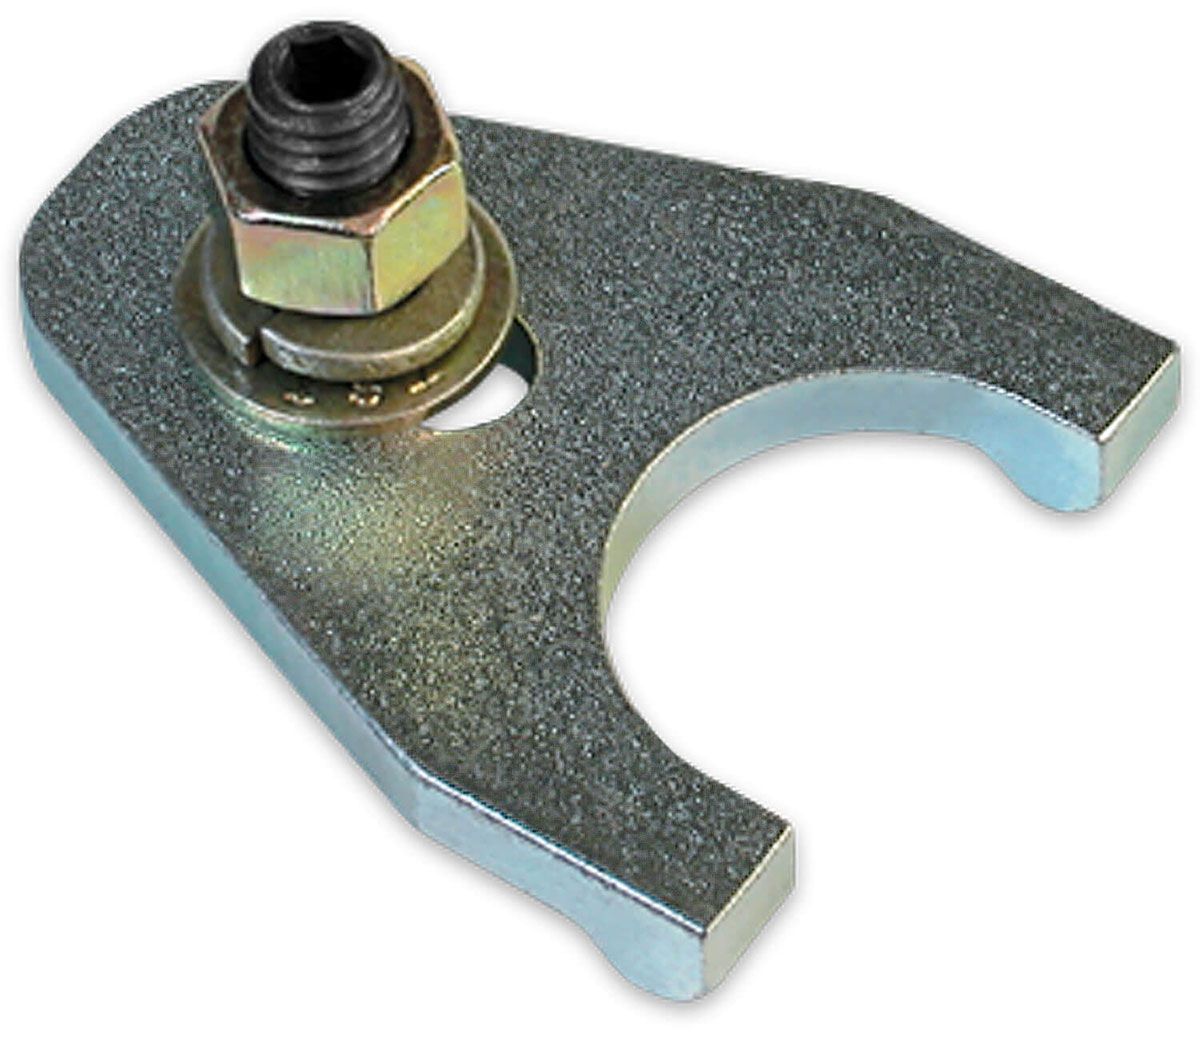 MSD8110 - CHEV BILLET HOLD DOWN CLAMP